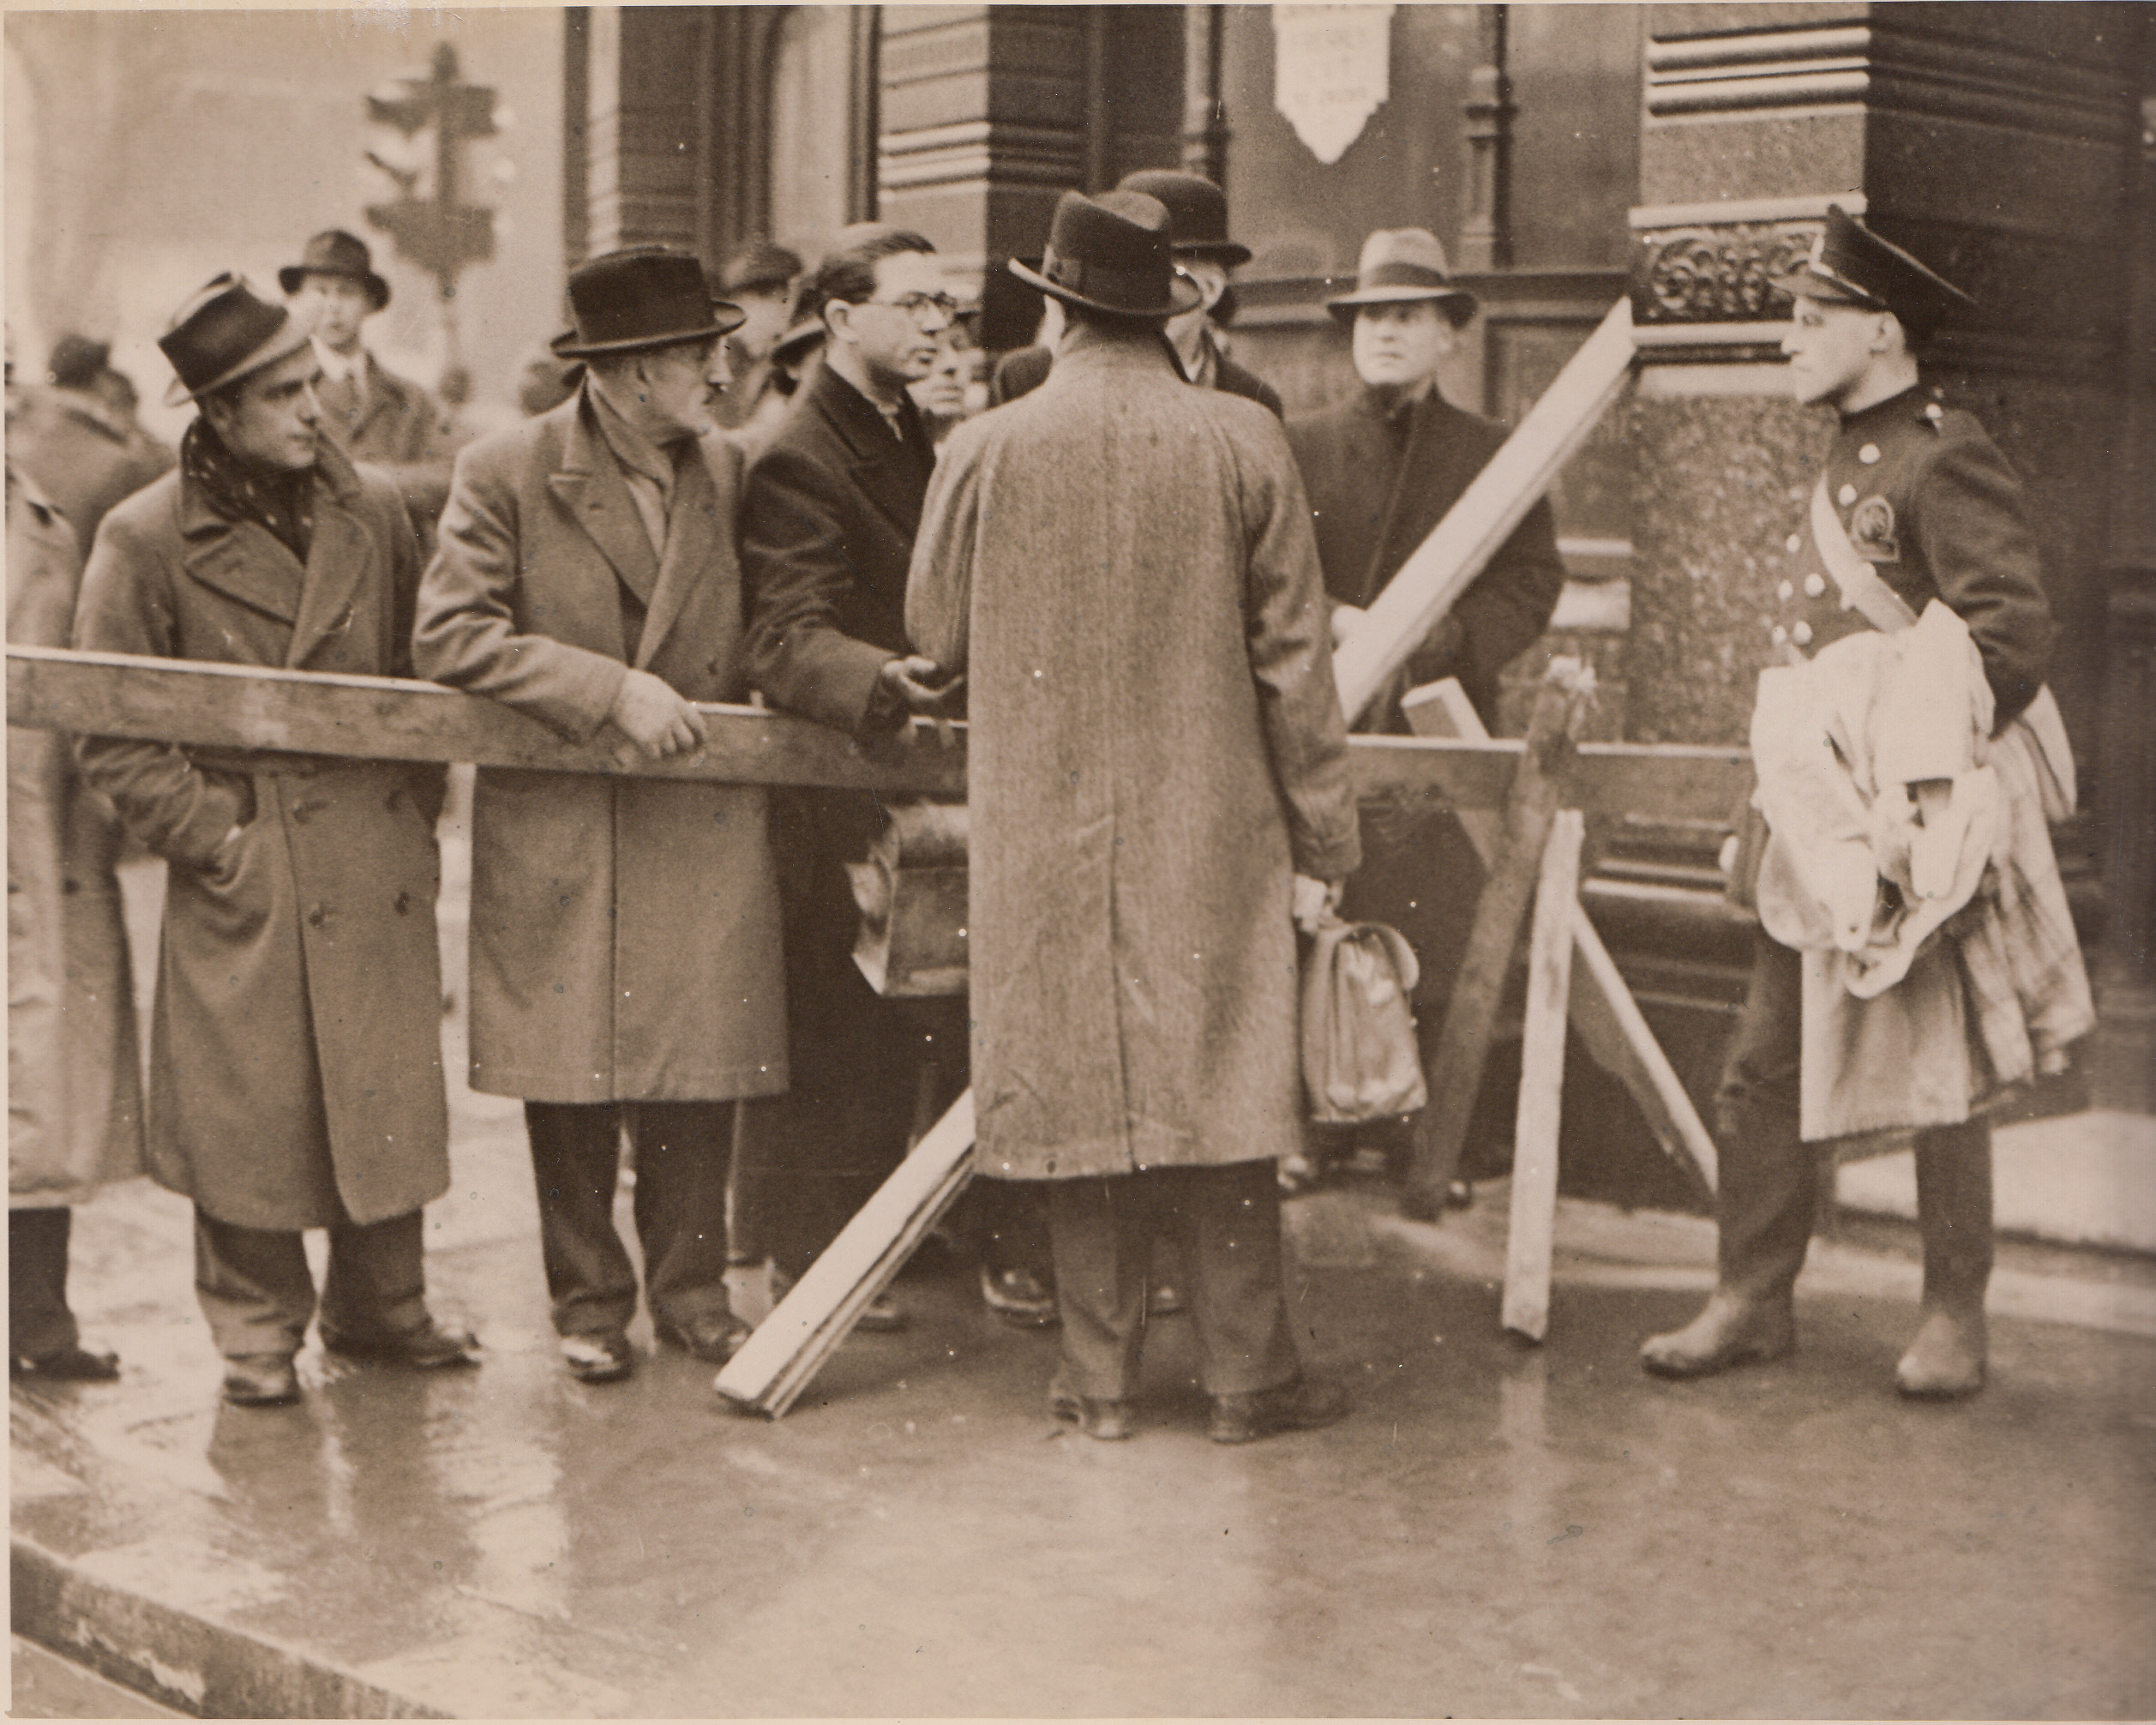 London Carries On, 1/14/41  LONDON - Following the most destructive air raid ever felt by the city, Londoners line up at this barrier to ask officials if their office building is still standing.;